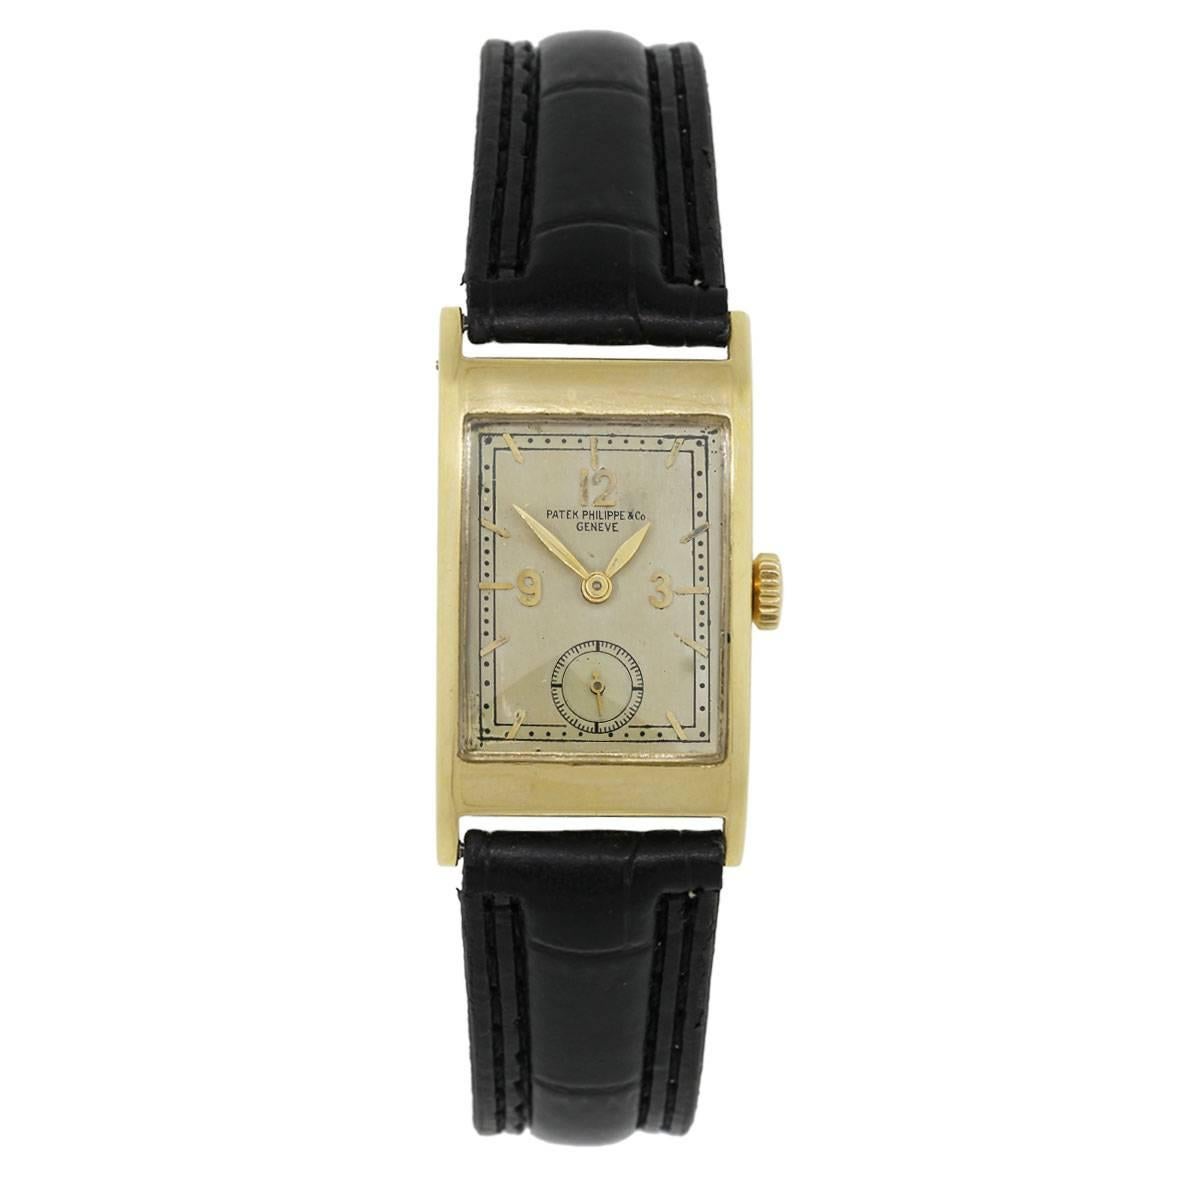 Brand: Patek Philippe
Case Material: 18k 
Case Diameter: 21mm
Bezel: Smooth 18k yellow gold
Dial: Silvered dial with sub dial at the 6 o’clock position
Bracelet: Black leather strap
Crystal: Plastic
Size: 7.50″ in length
Clasp: Stainless steel tang